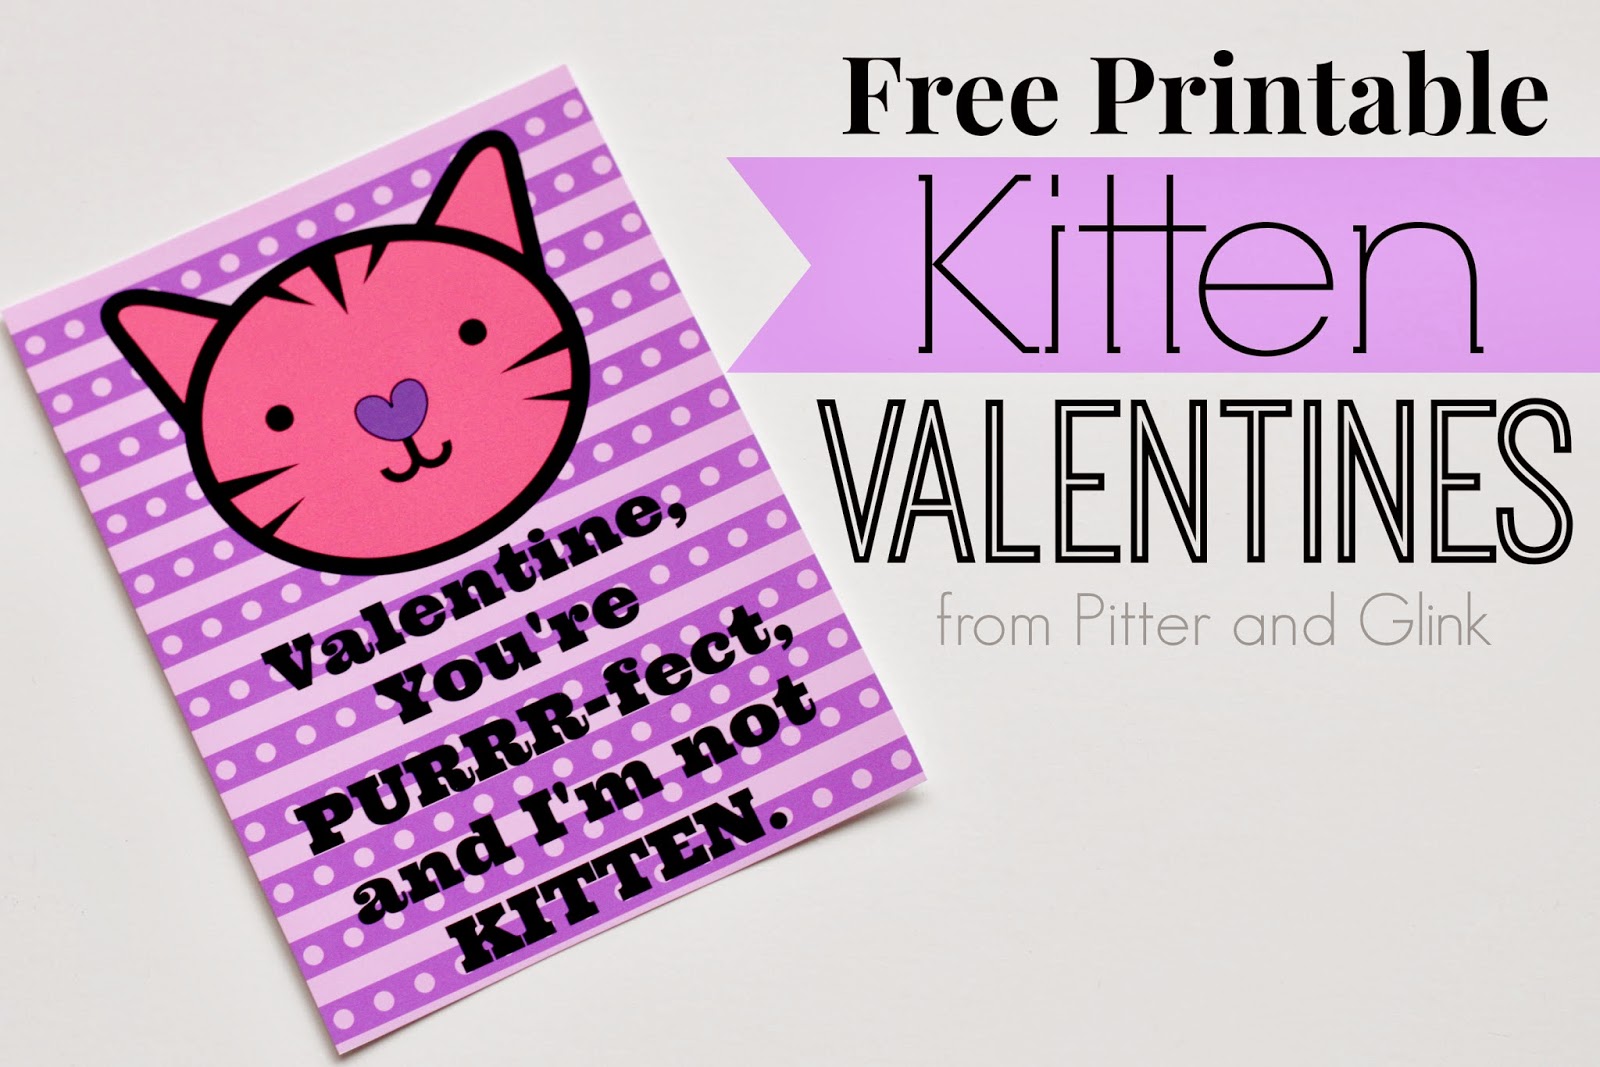 Free Printable Punny Kitten Valentines from Pitter and Glink #printablevalentine